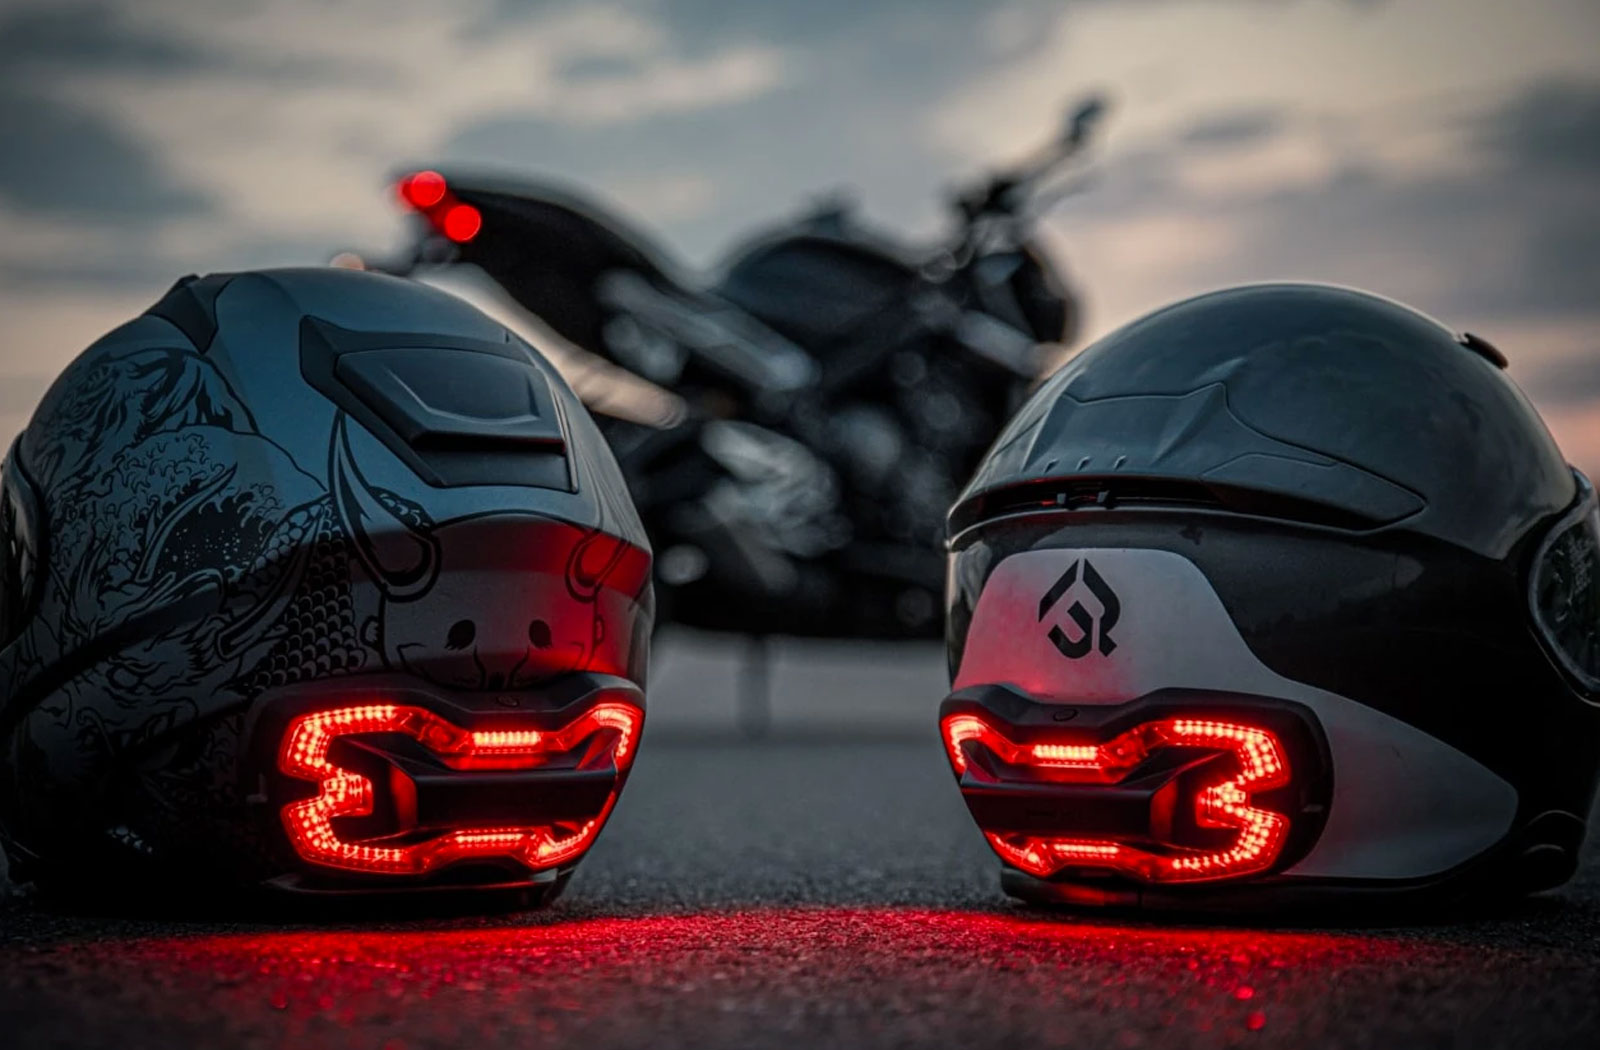 5 Essential Motorcycle Accessories You Didn't Know You Needed